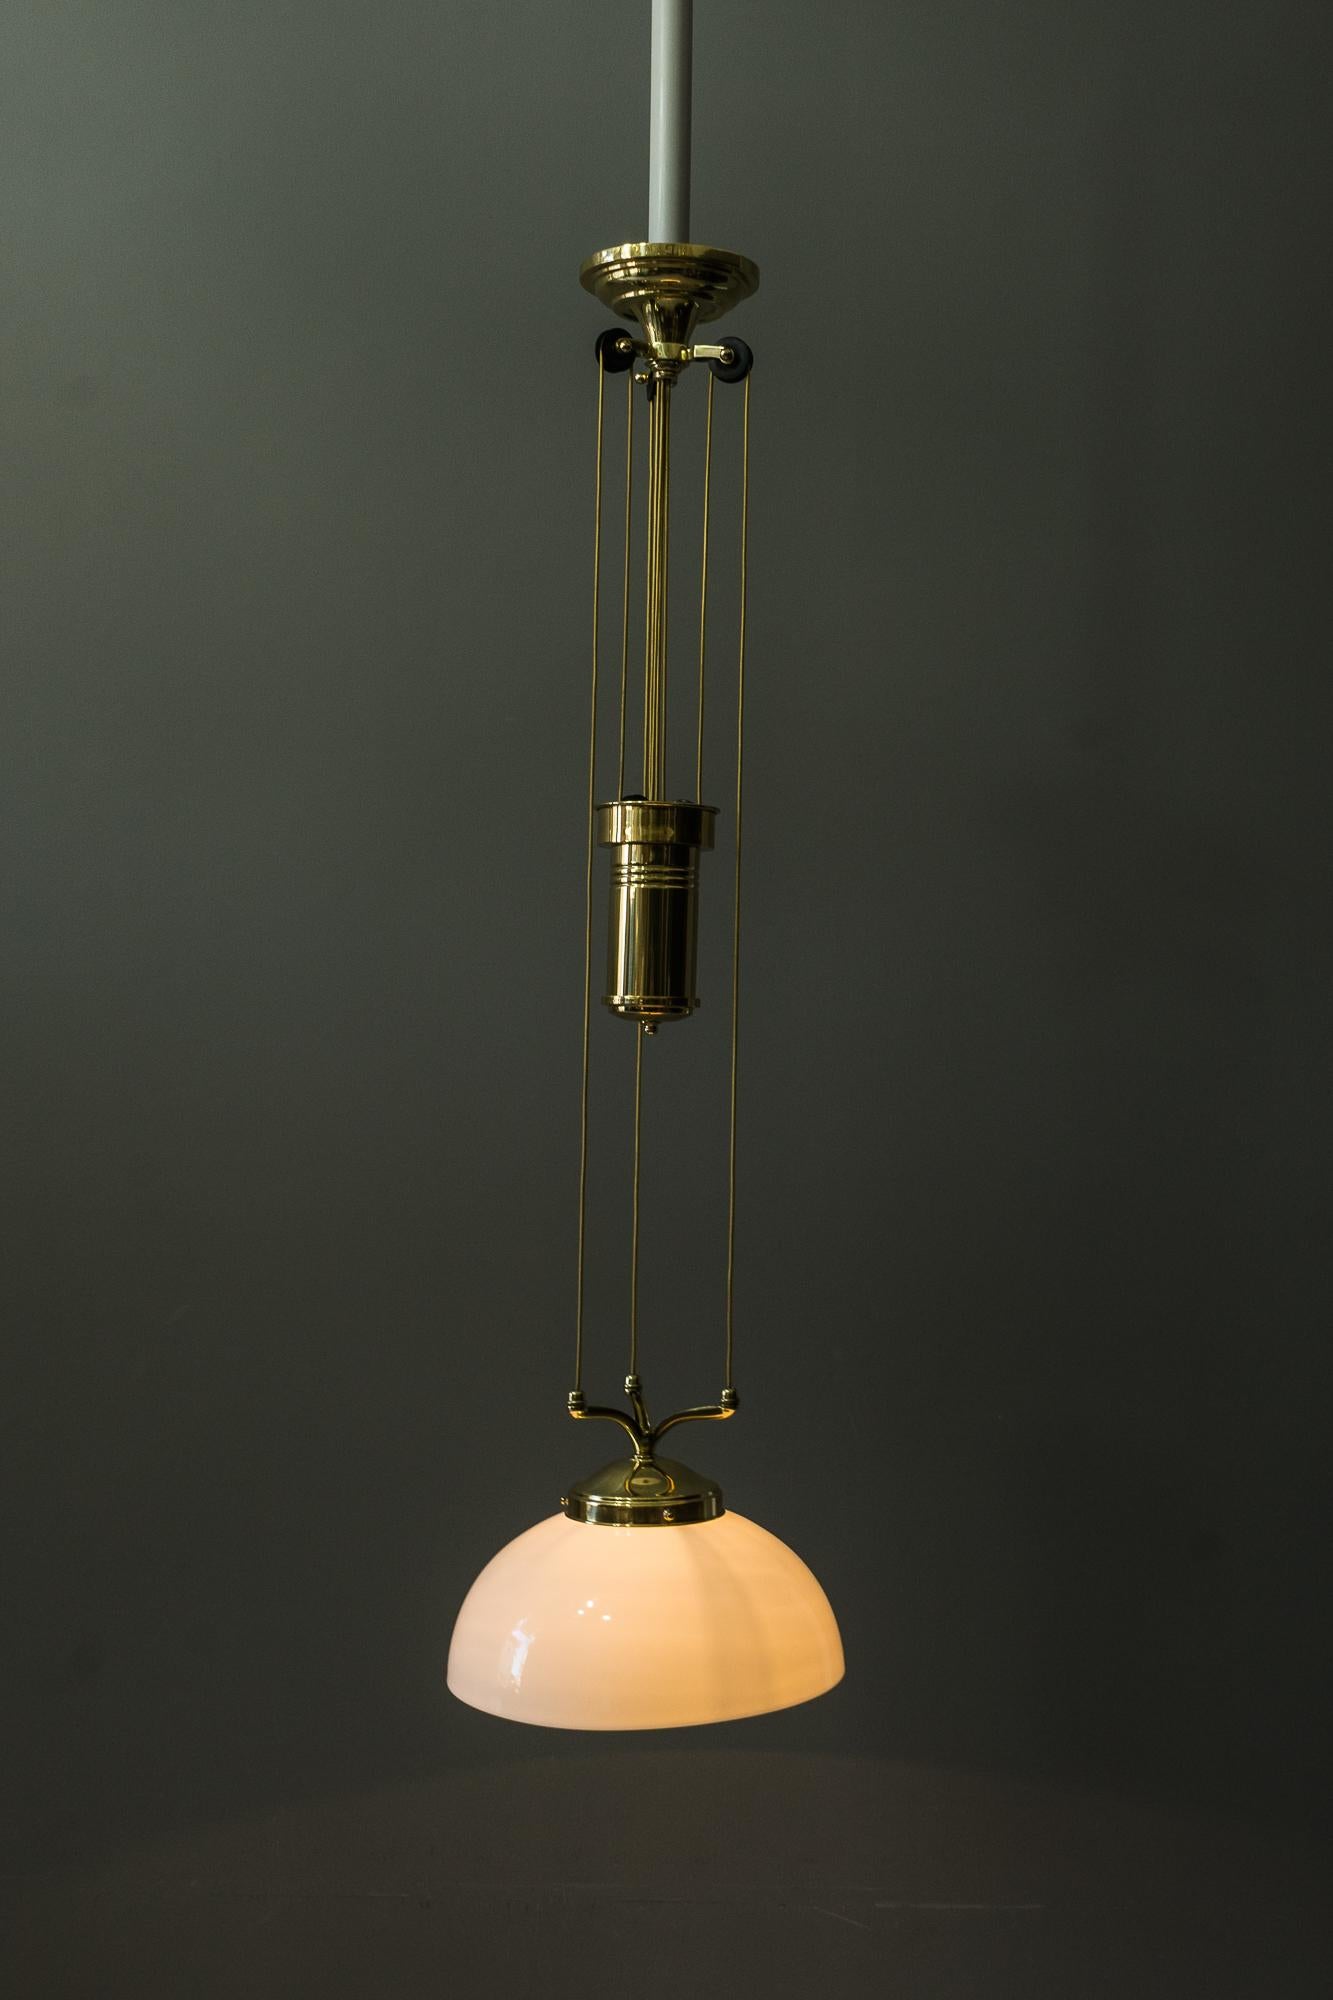 Adjustable Jugendstil chandelier with white opal glass, circa 1907
Polished and stove enameled
Measures: The high is adjustable from 90cm-180cm
Wide is 31cm
New wiring.